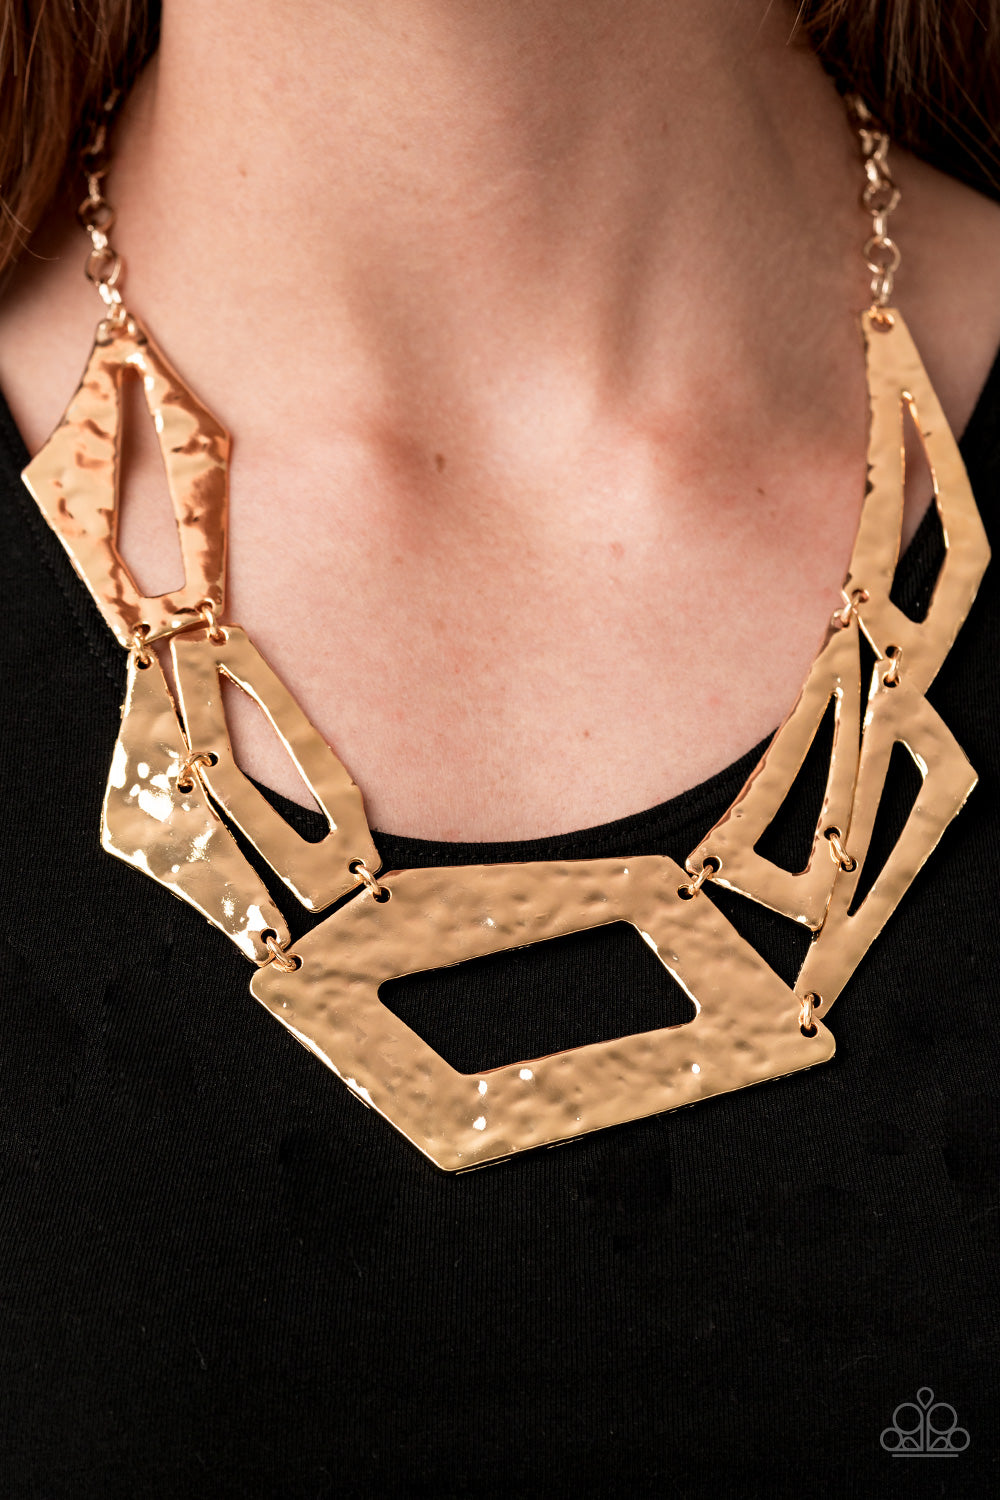 Break The Mold - Gold Paparazzi Necklace